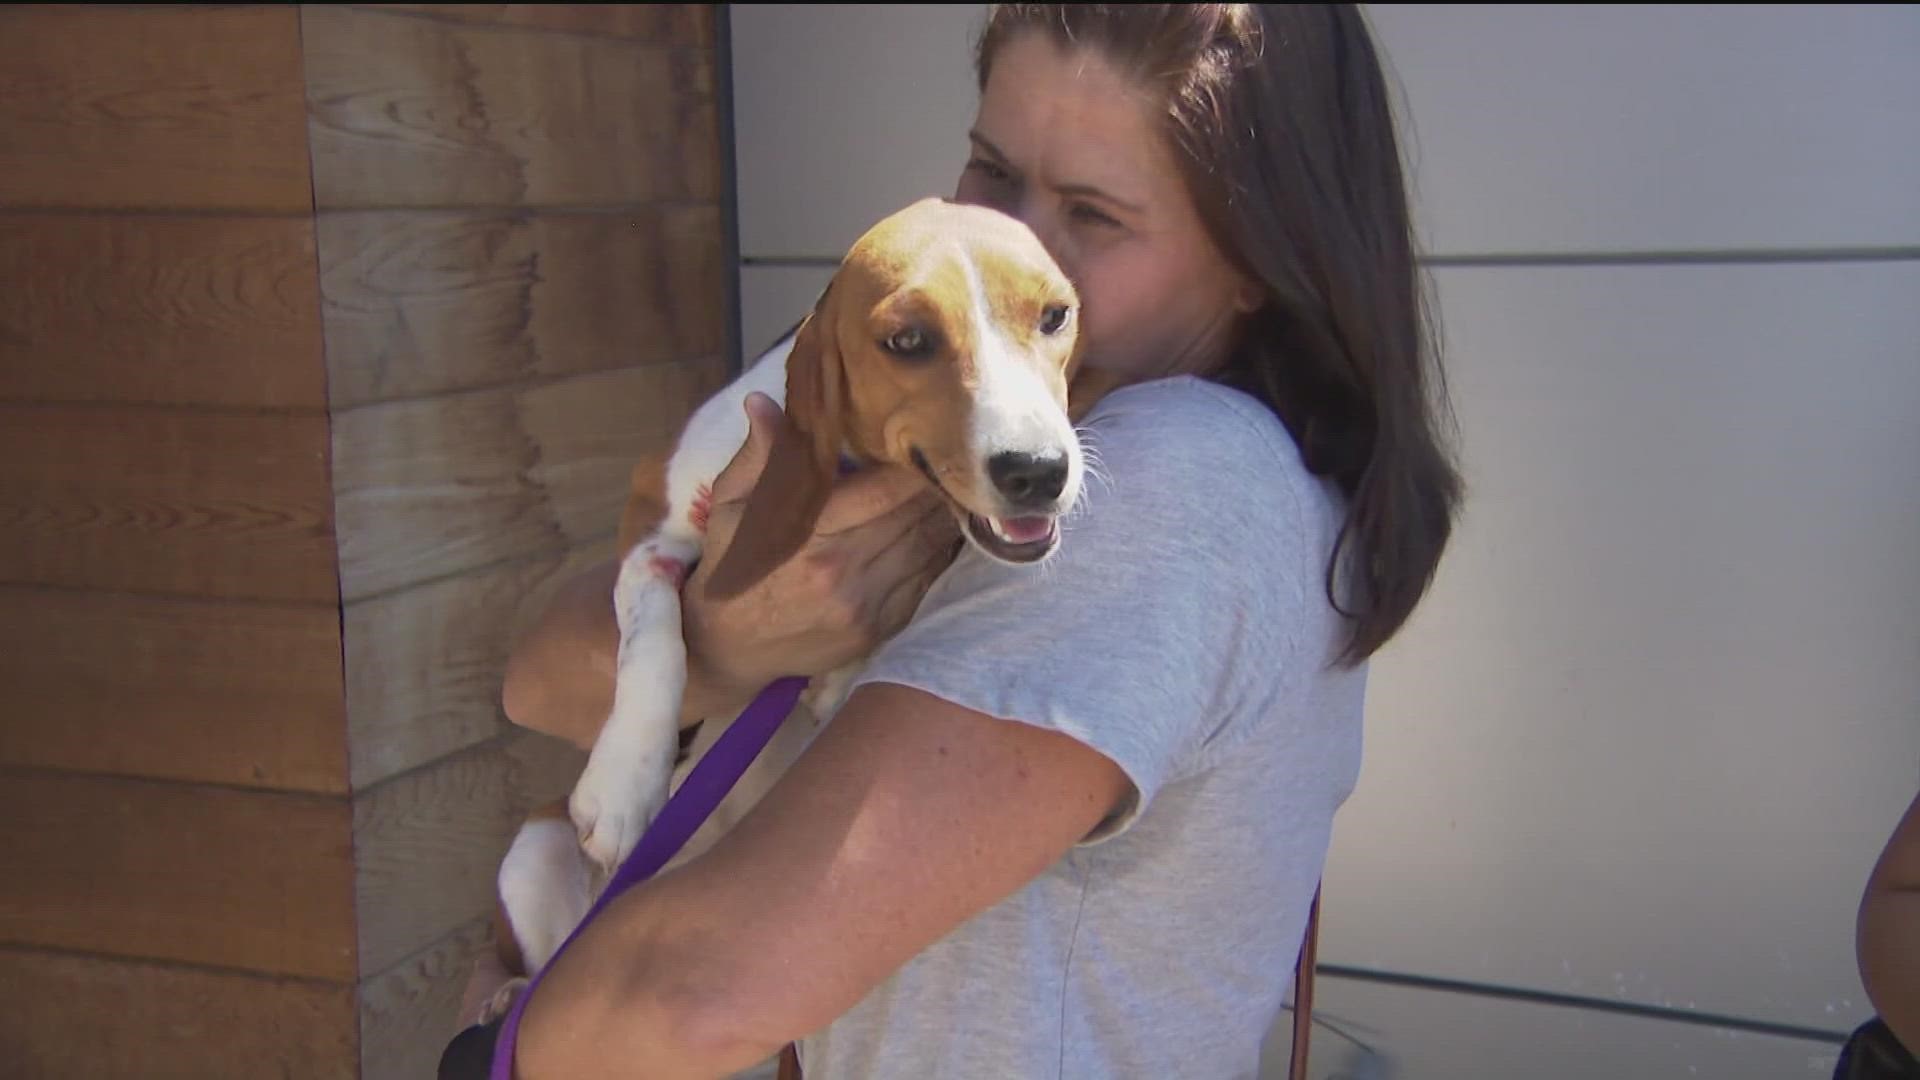 The beagles arrived on a Greater Goods Charities flight at Gillespie Field in El Cajon on Wednesday, Aug. 31.